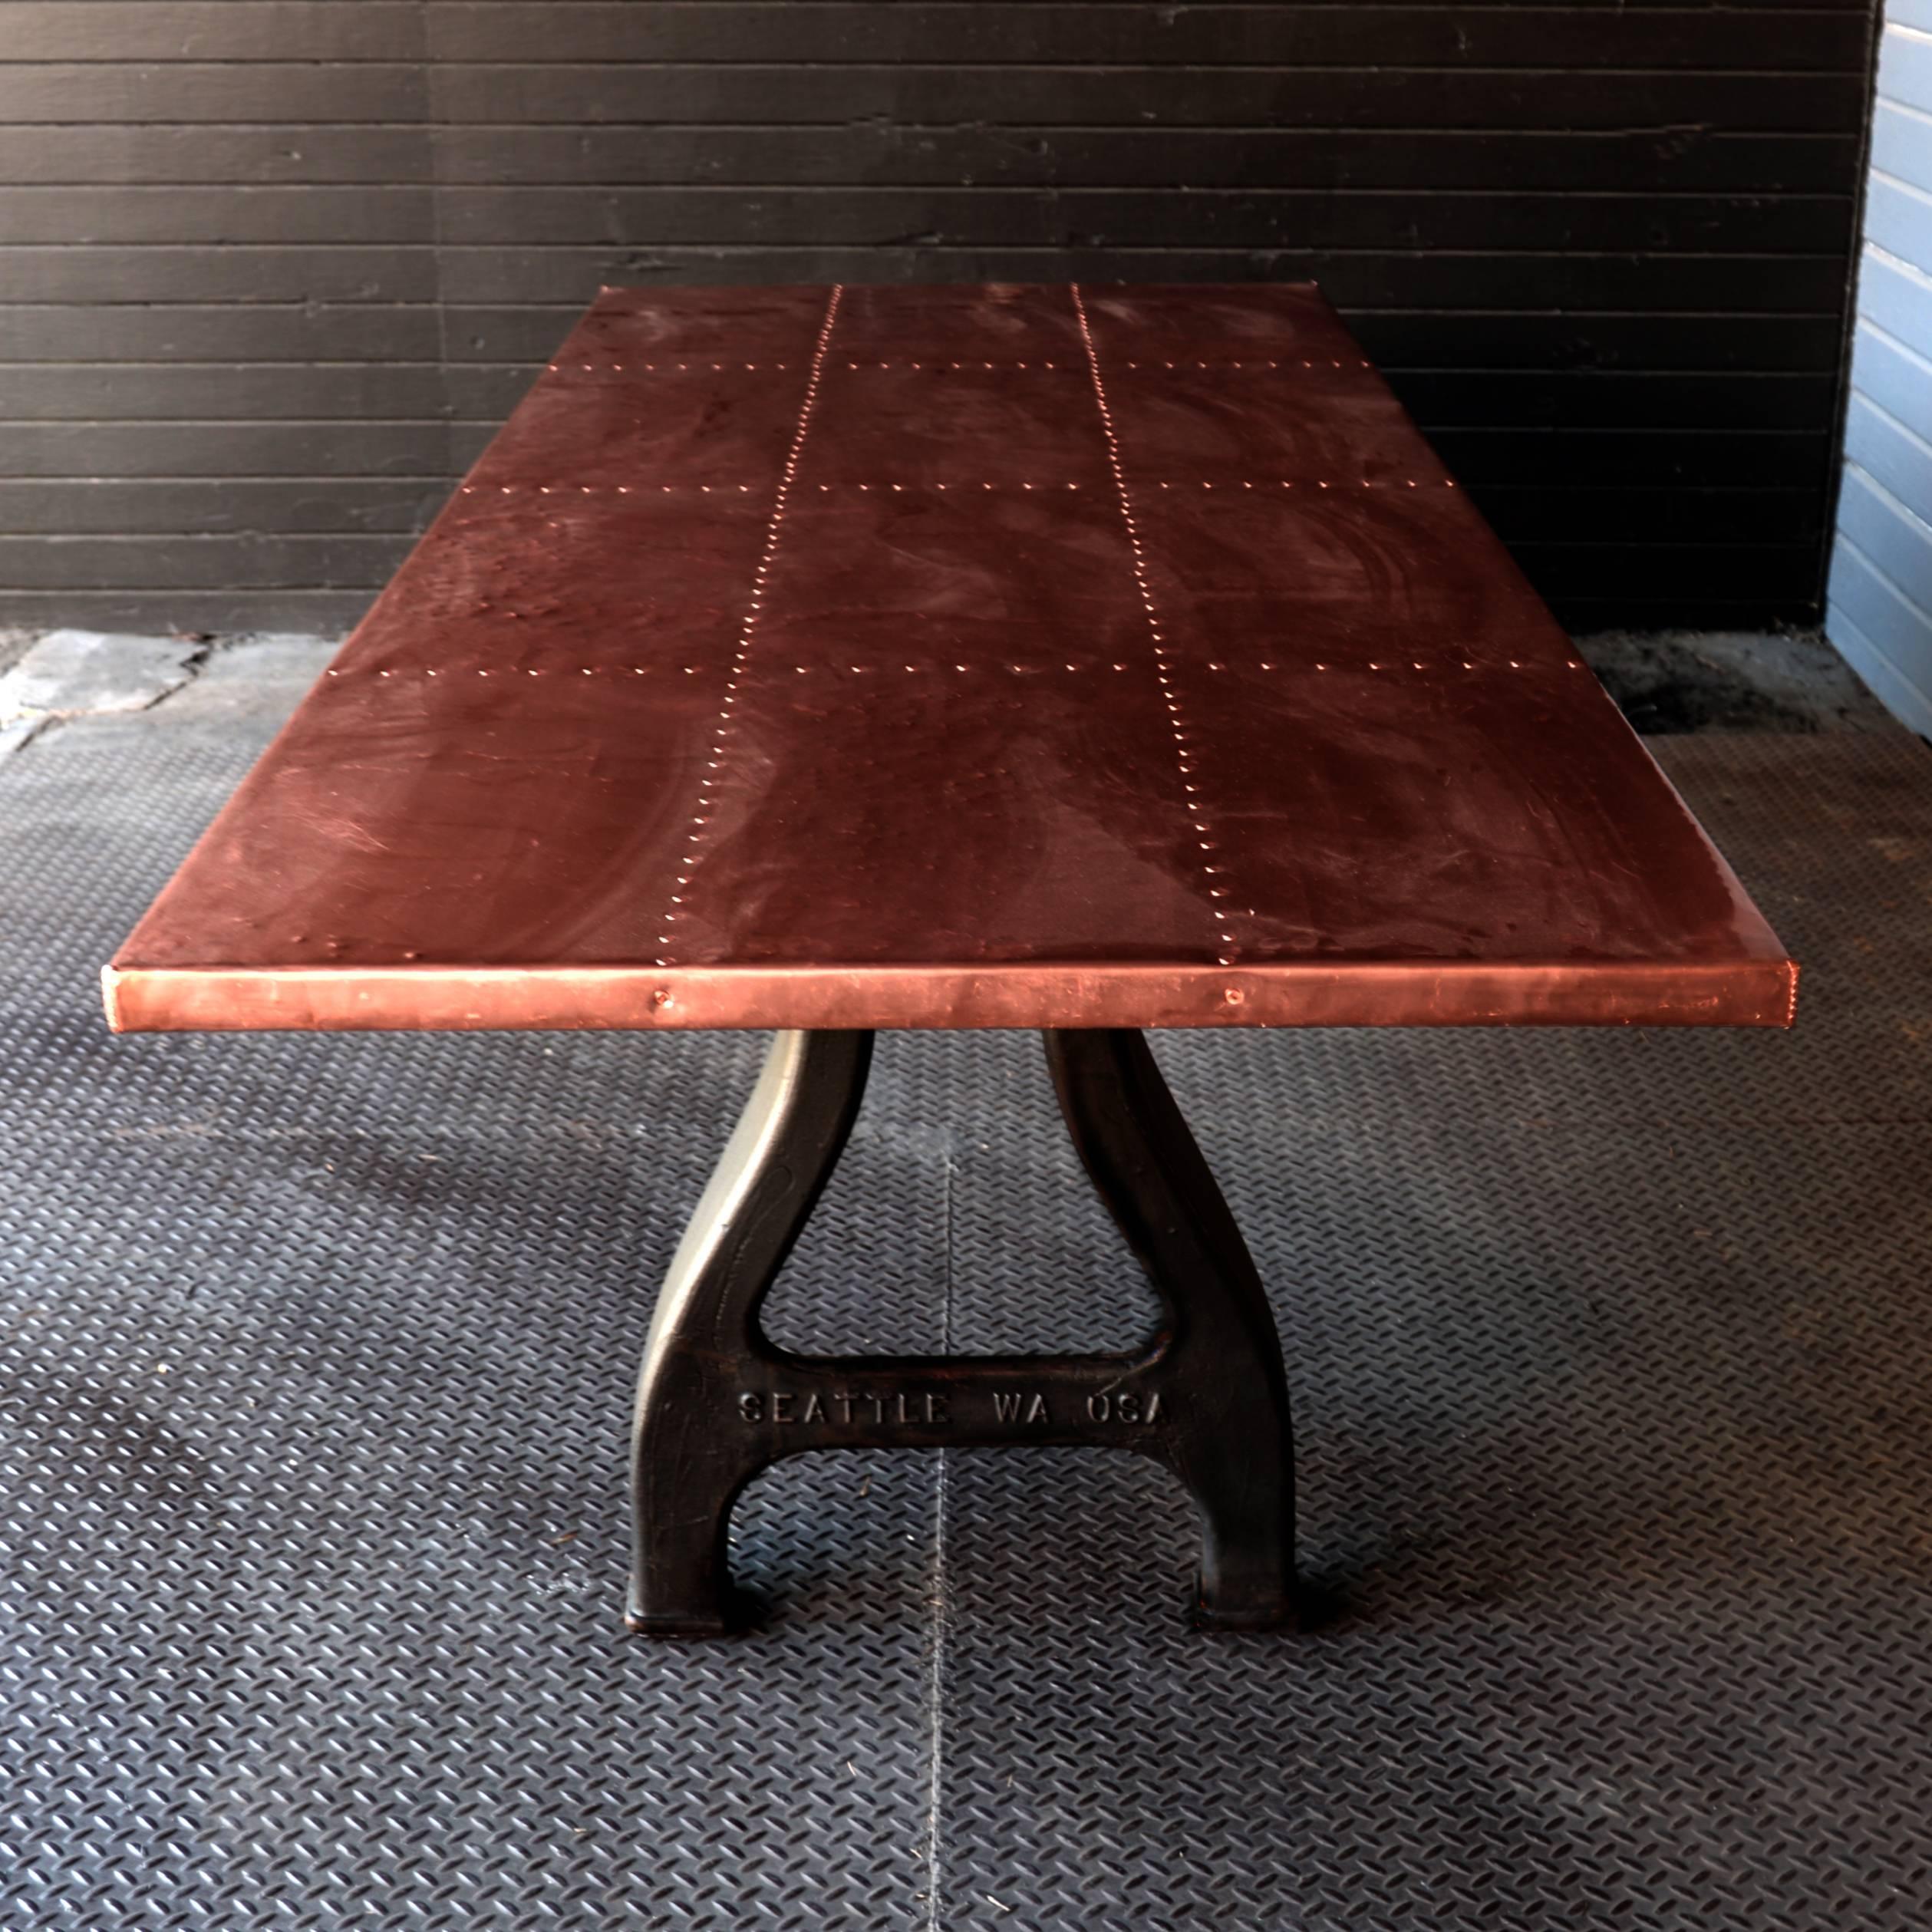 Dining tabletop clad in heavy-gauge seamless copper sheet accented with copper nailhead trim. Vintage inspired foundry leg base. Custom sizes available.
    